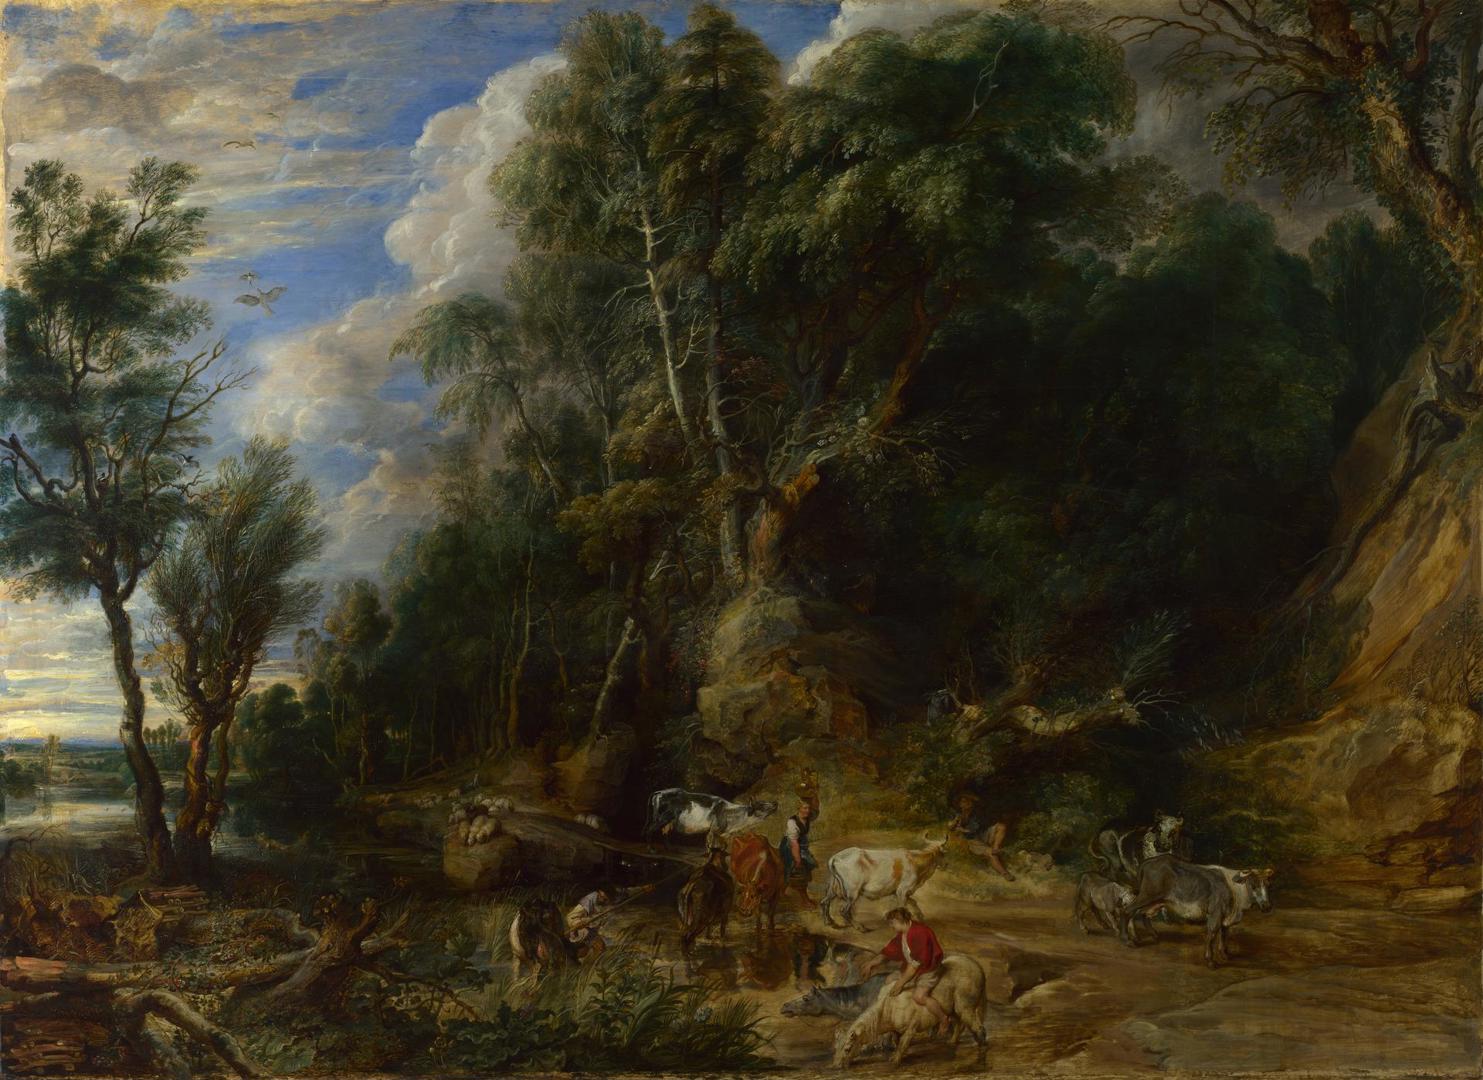 The Watering Place by Peter Paul Rubens